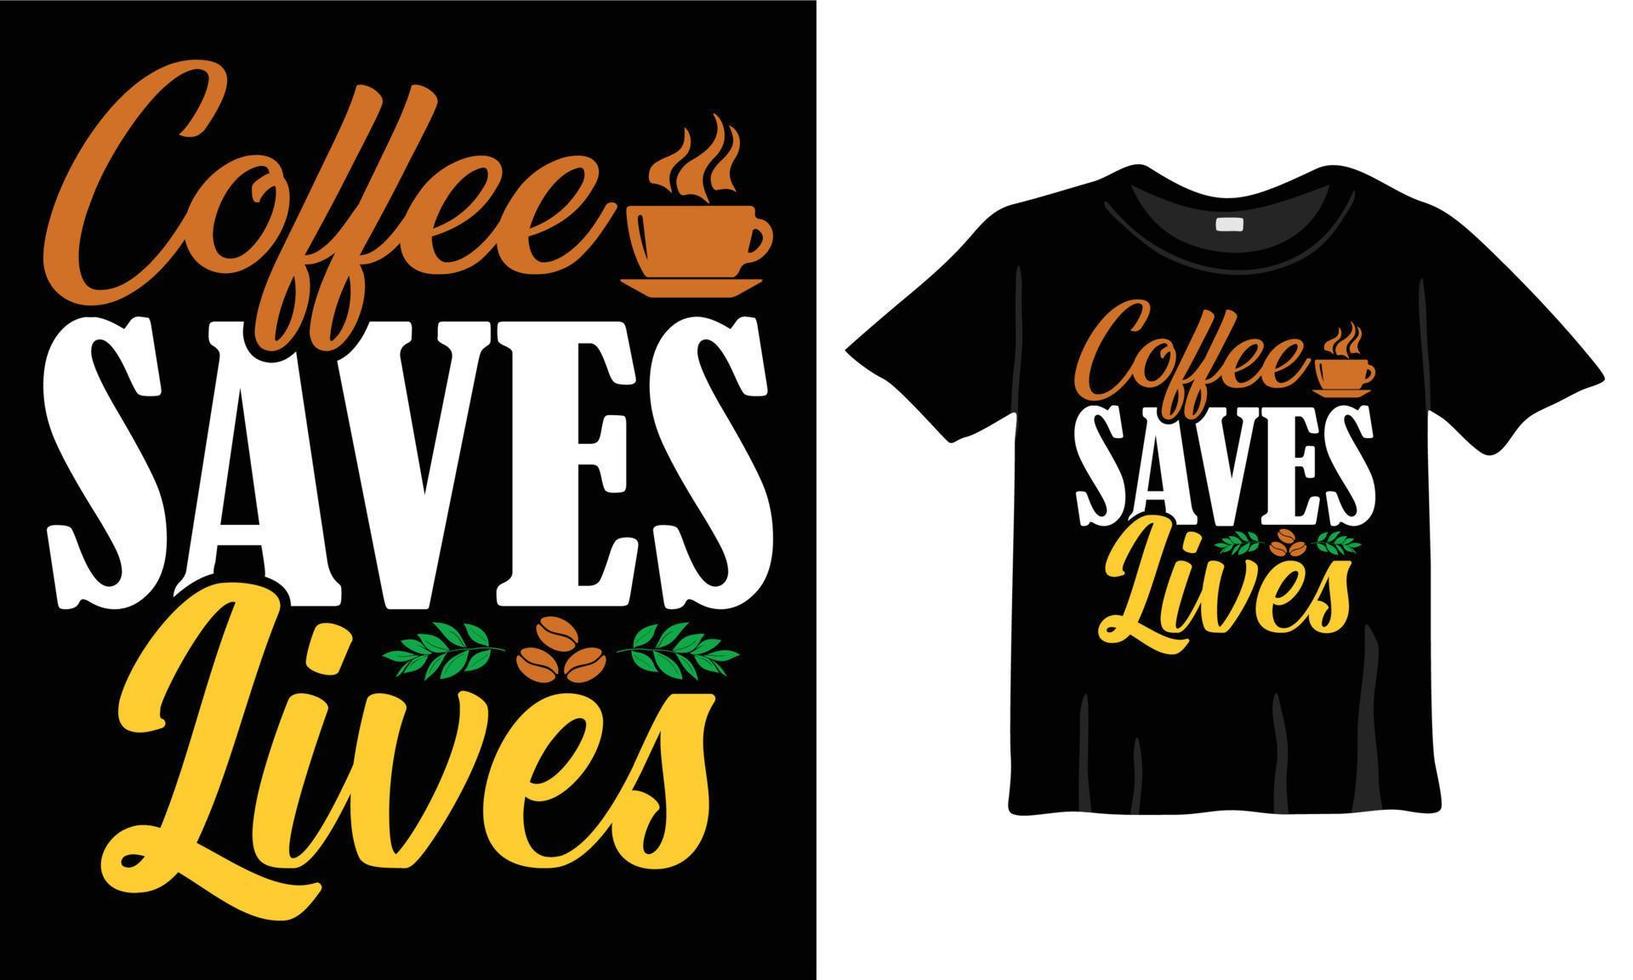 Coffee Saves Lives. Coffee lover typography T-Shirt Design t-shirts design, typography design, Handrawn lettering phrase, coffee lovers t-shirt design print ready EPS file vector